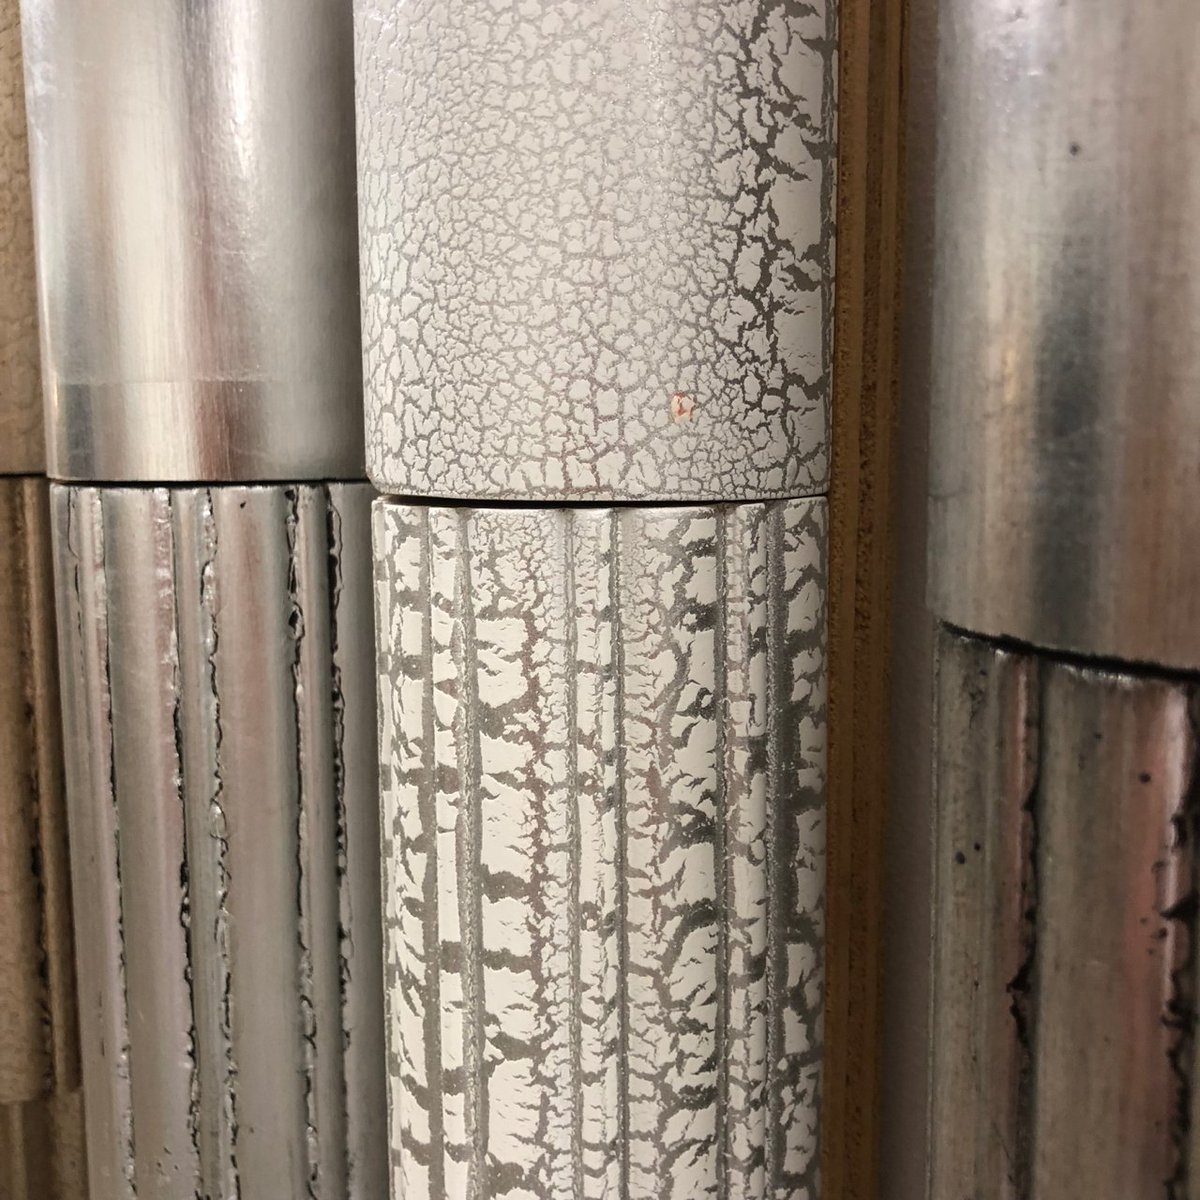 #FinishFridays Check these gorgeous silvers from our J.L. Anthony collection. That Cracked Ice (CI) in the middle is a show stopper.

#JLAnthony #CustomDraperyHardware #Finishes #LuxeDecor #WindowTreatments #DallasDesigners #Workroom #InstaDFW #LuxuryHomes #InteriorDesign #art